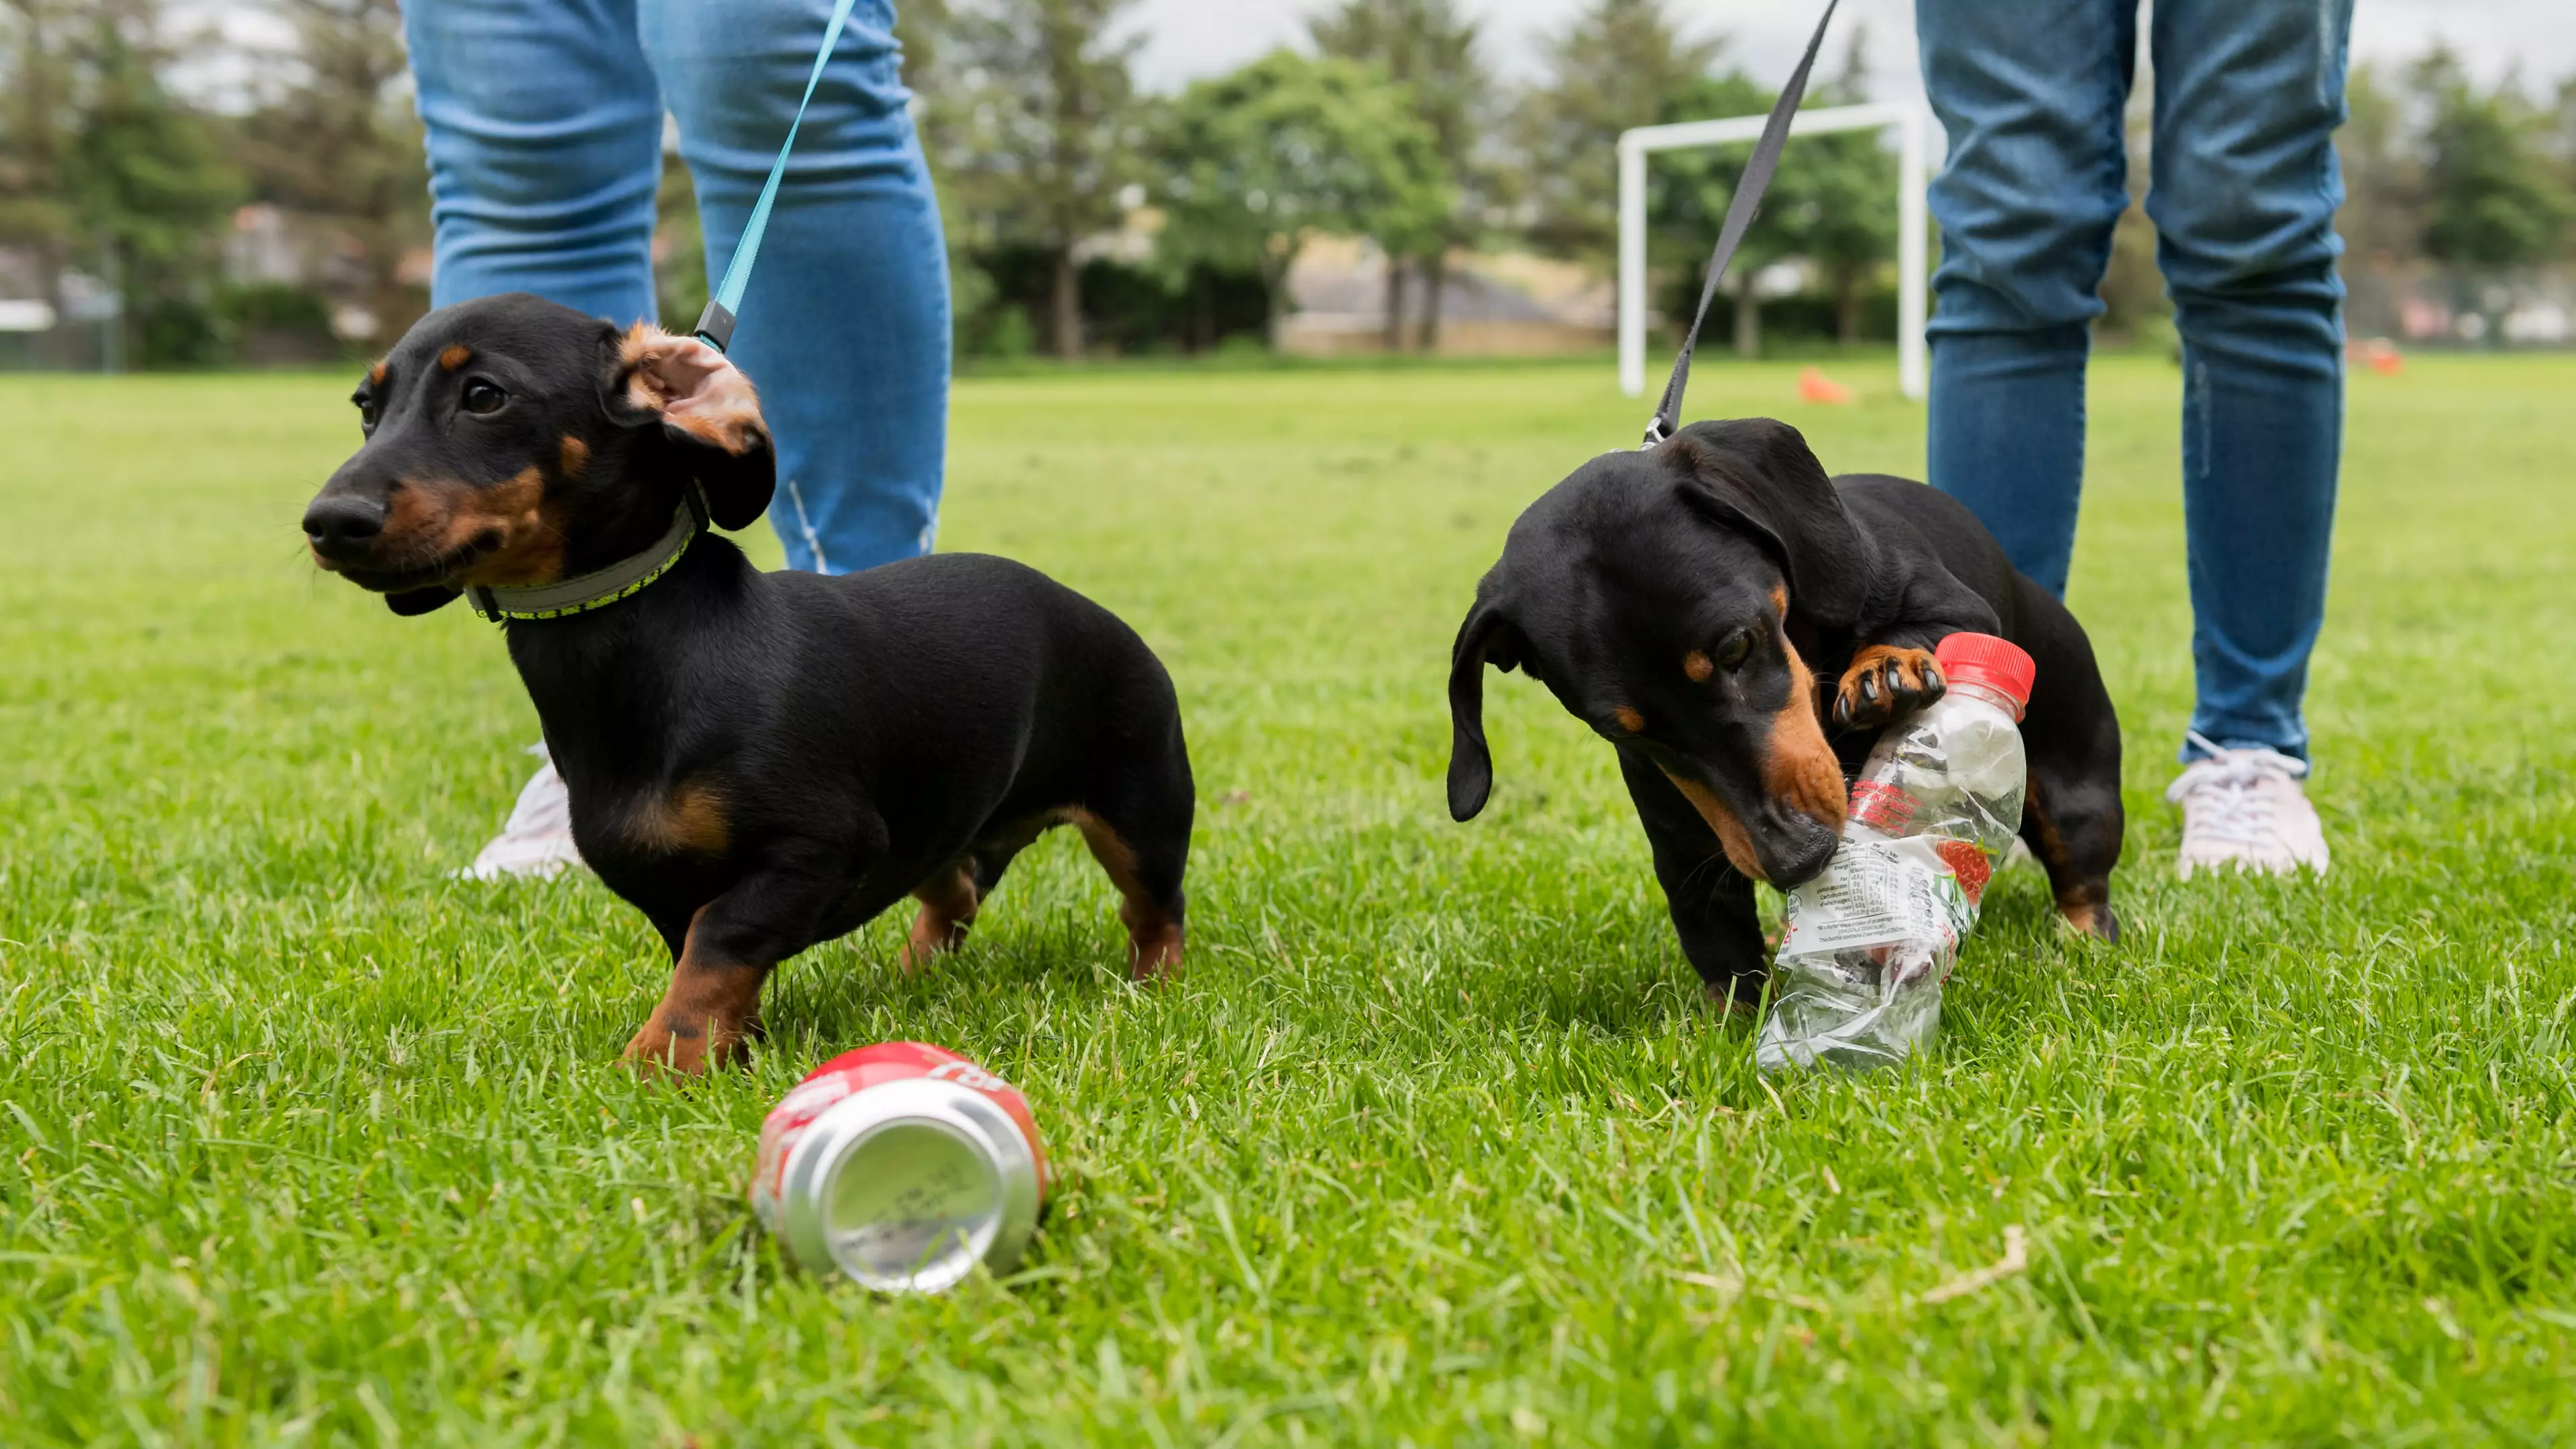 These Adorable Sausage Dogs Are Saving The Environment By Collecting Litter On Their Walks 